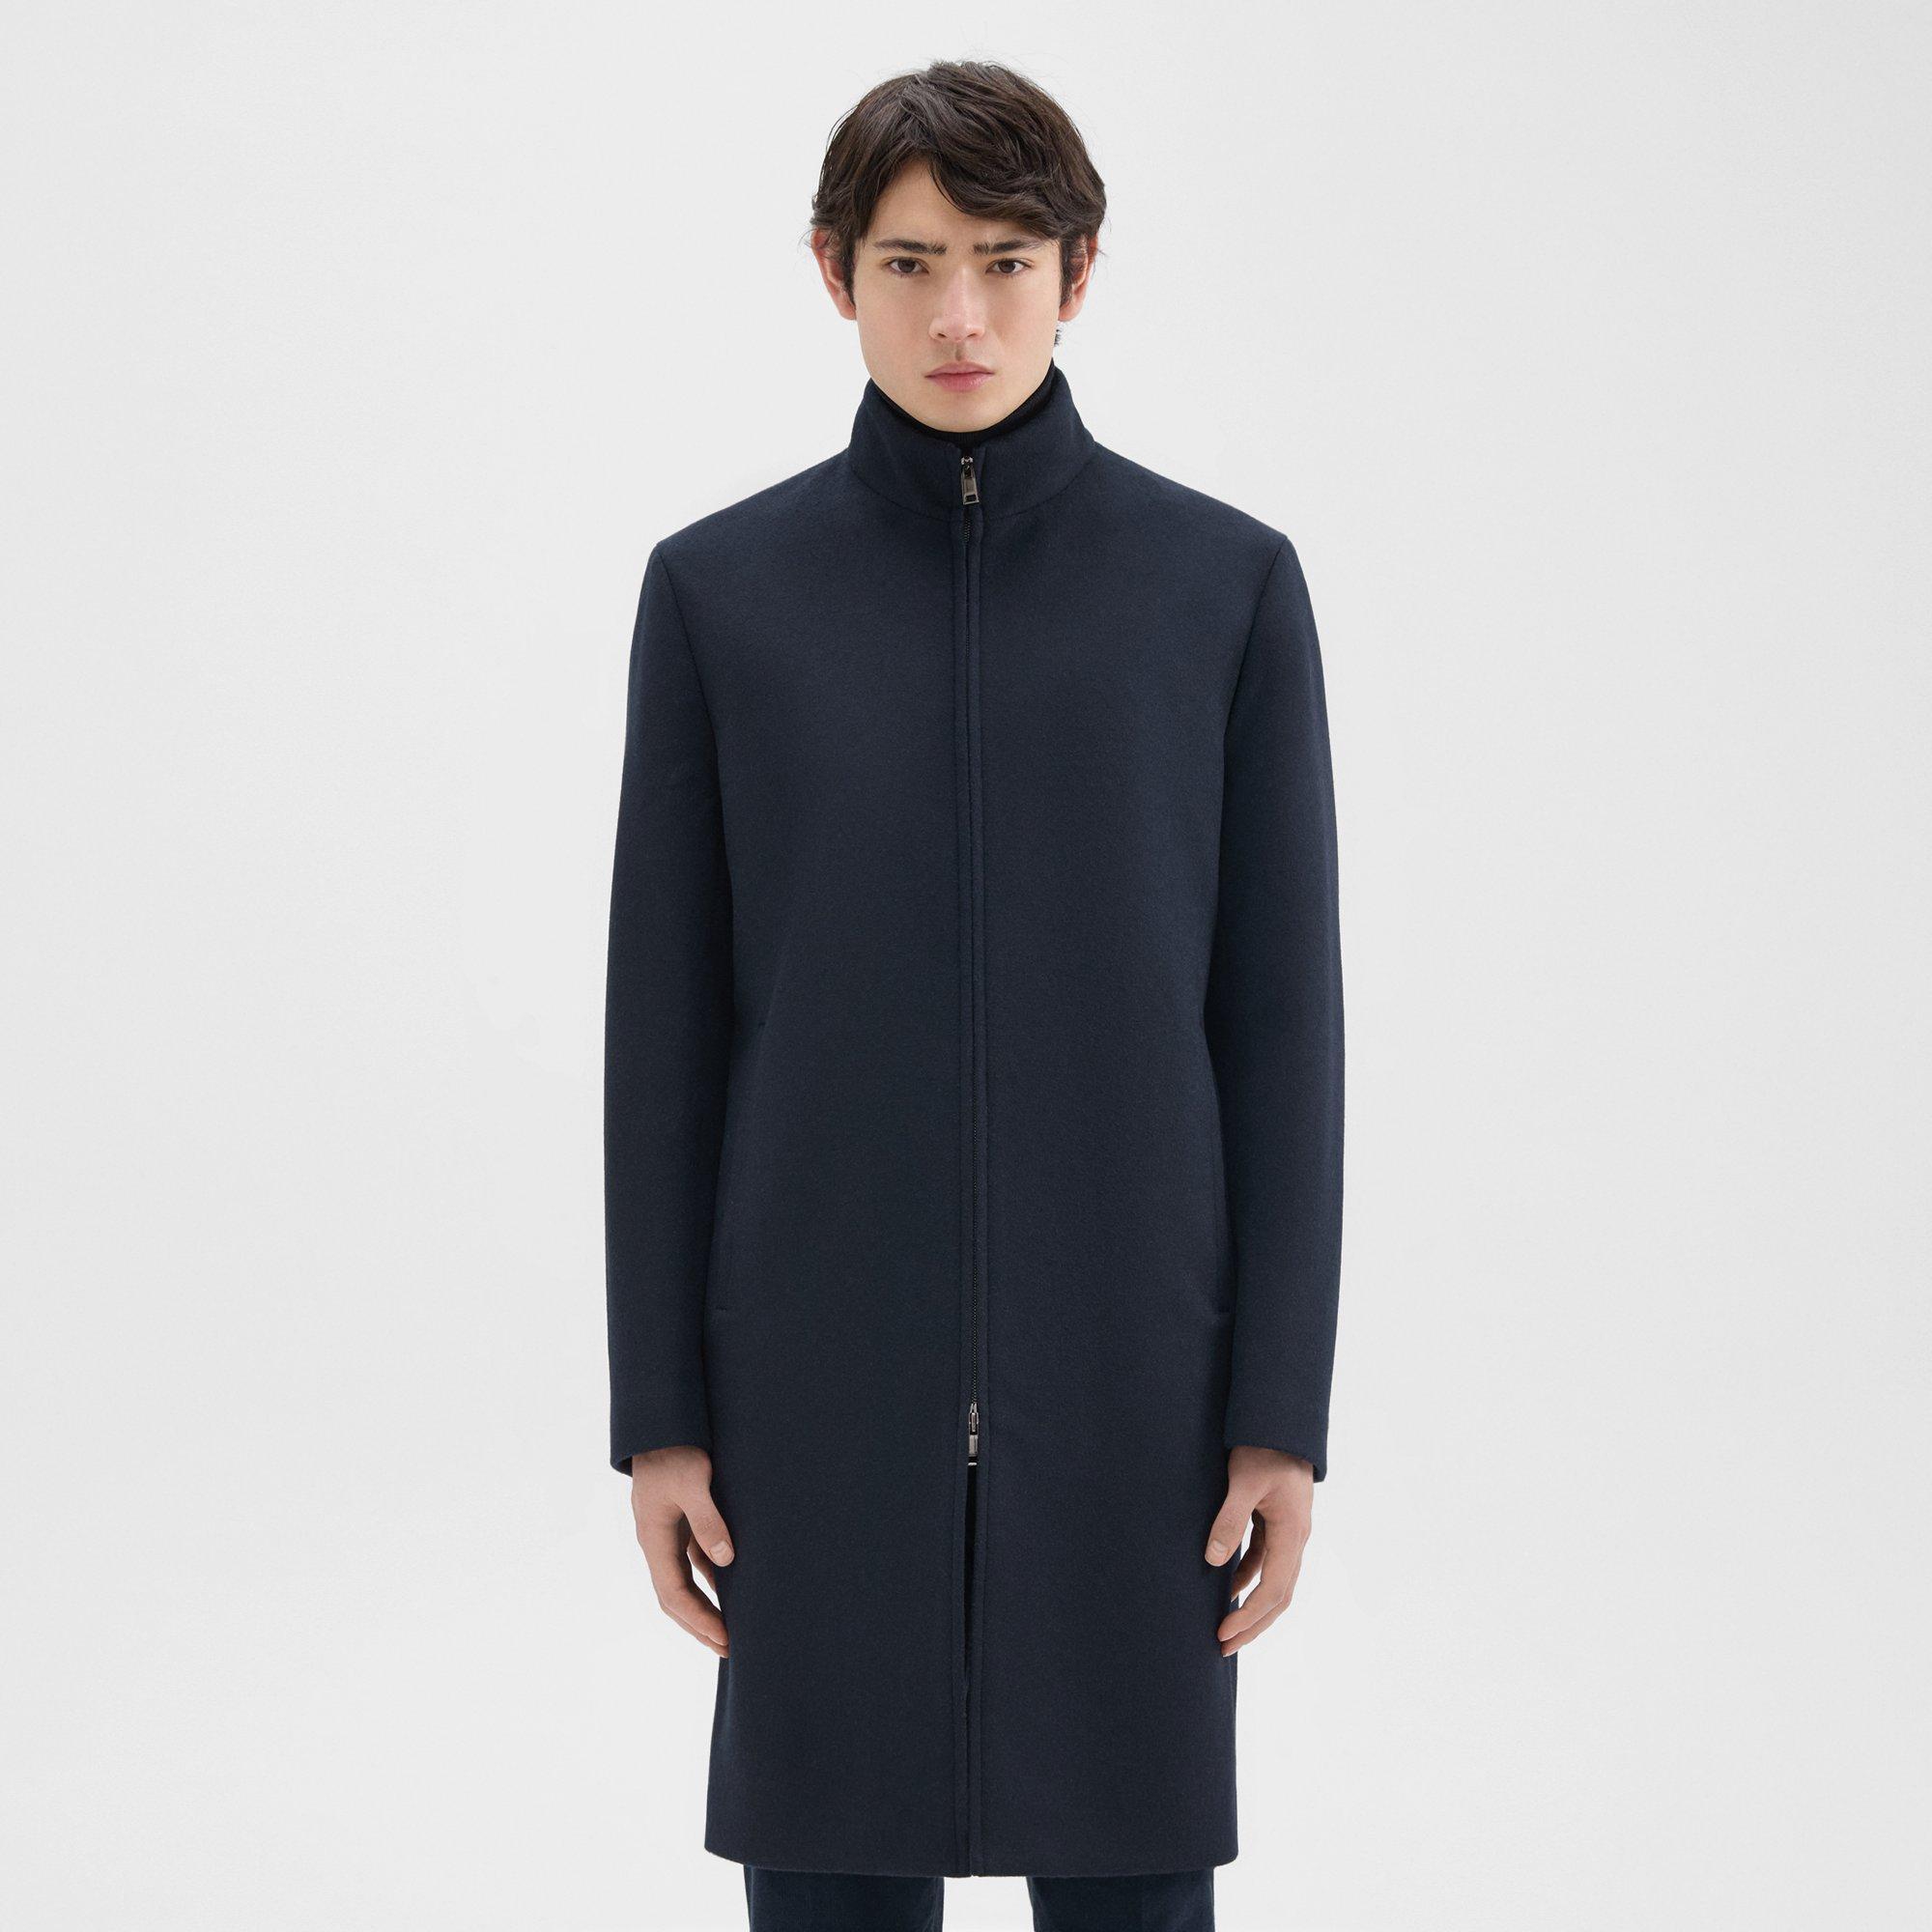 Theory Belvin Coat in Recycled Wool-Blend Melton